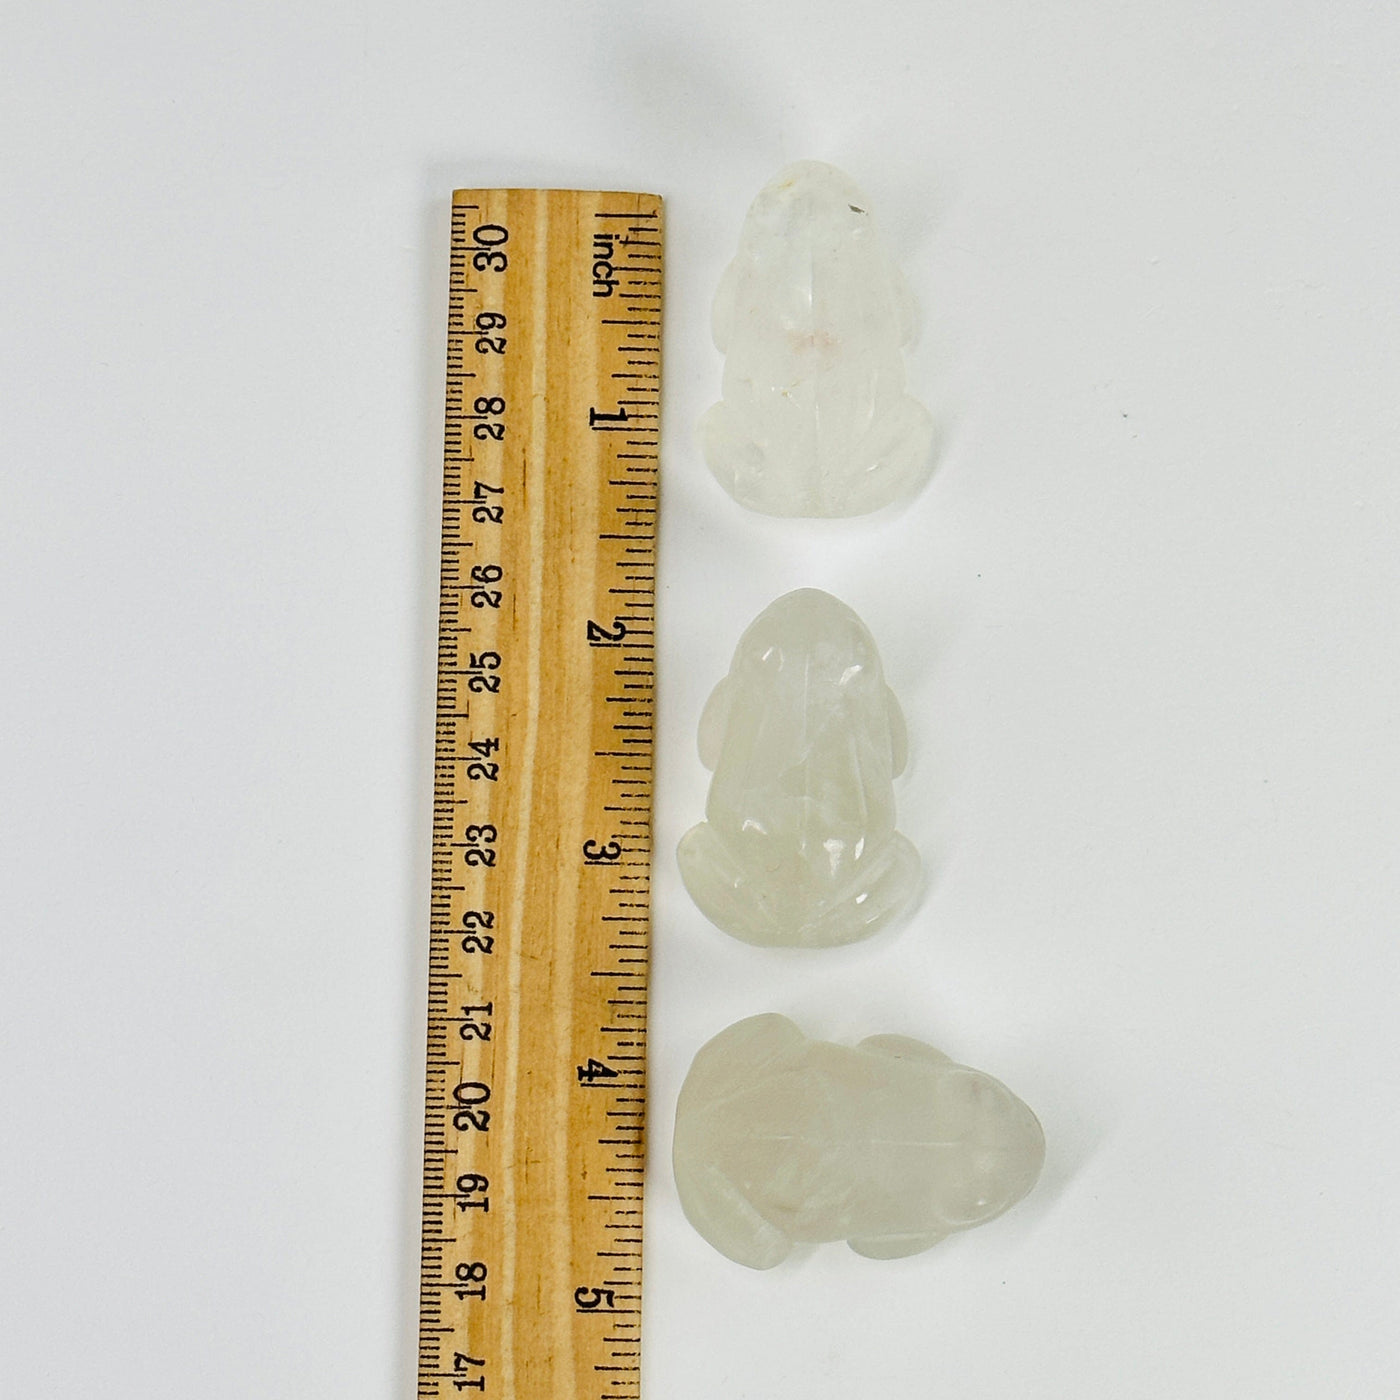 3 crystal quartz frogs next to a ruler for size reference